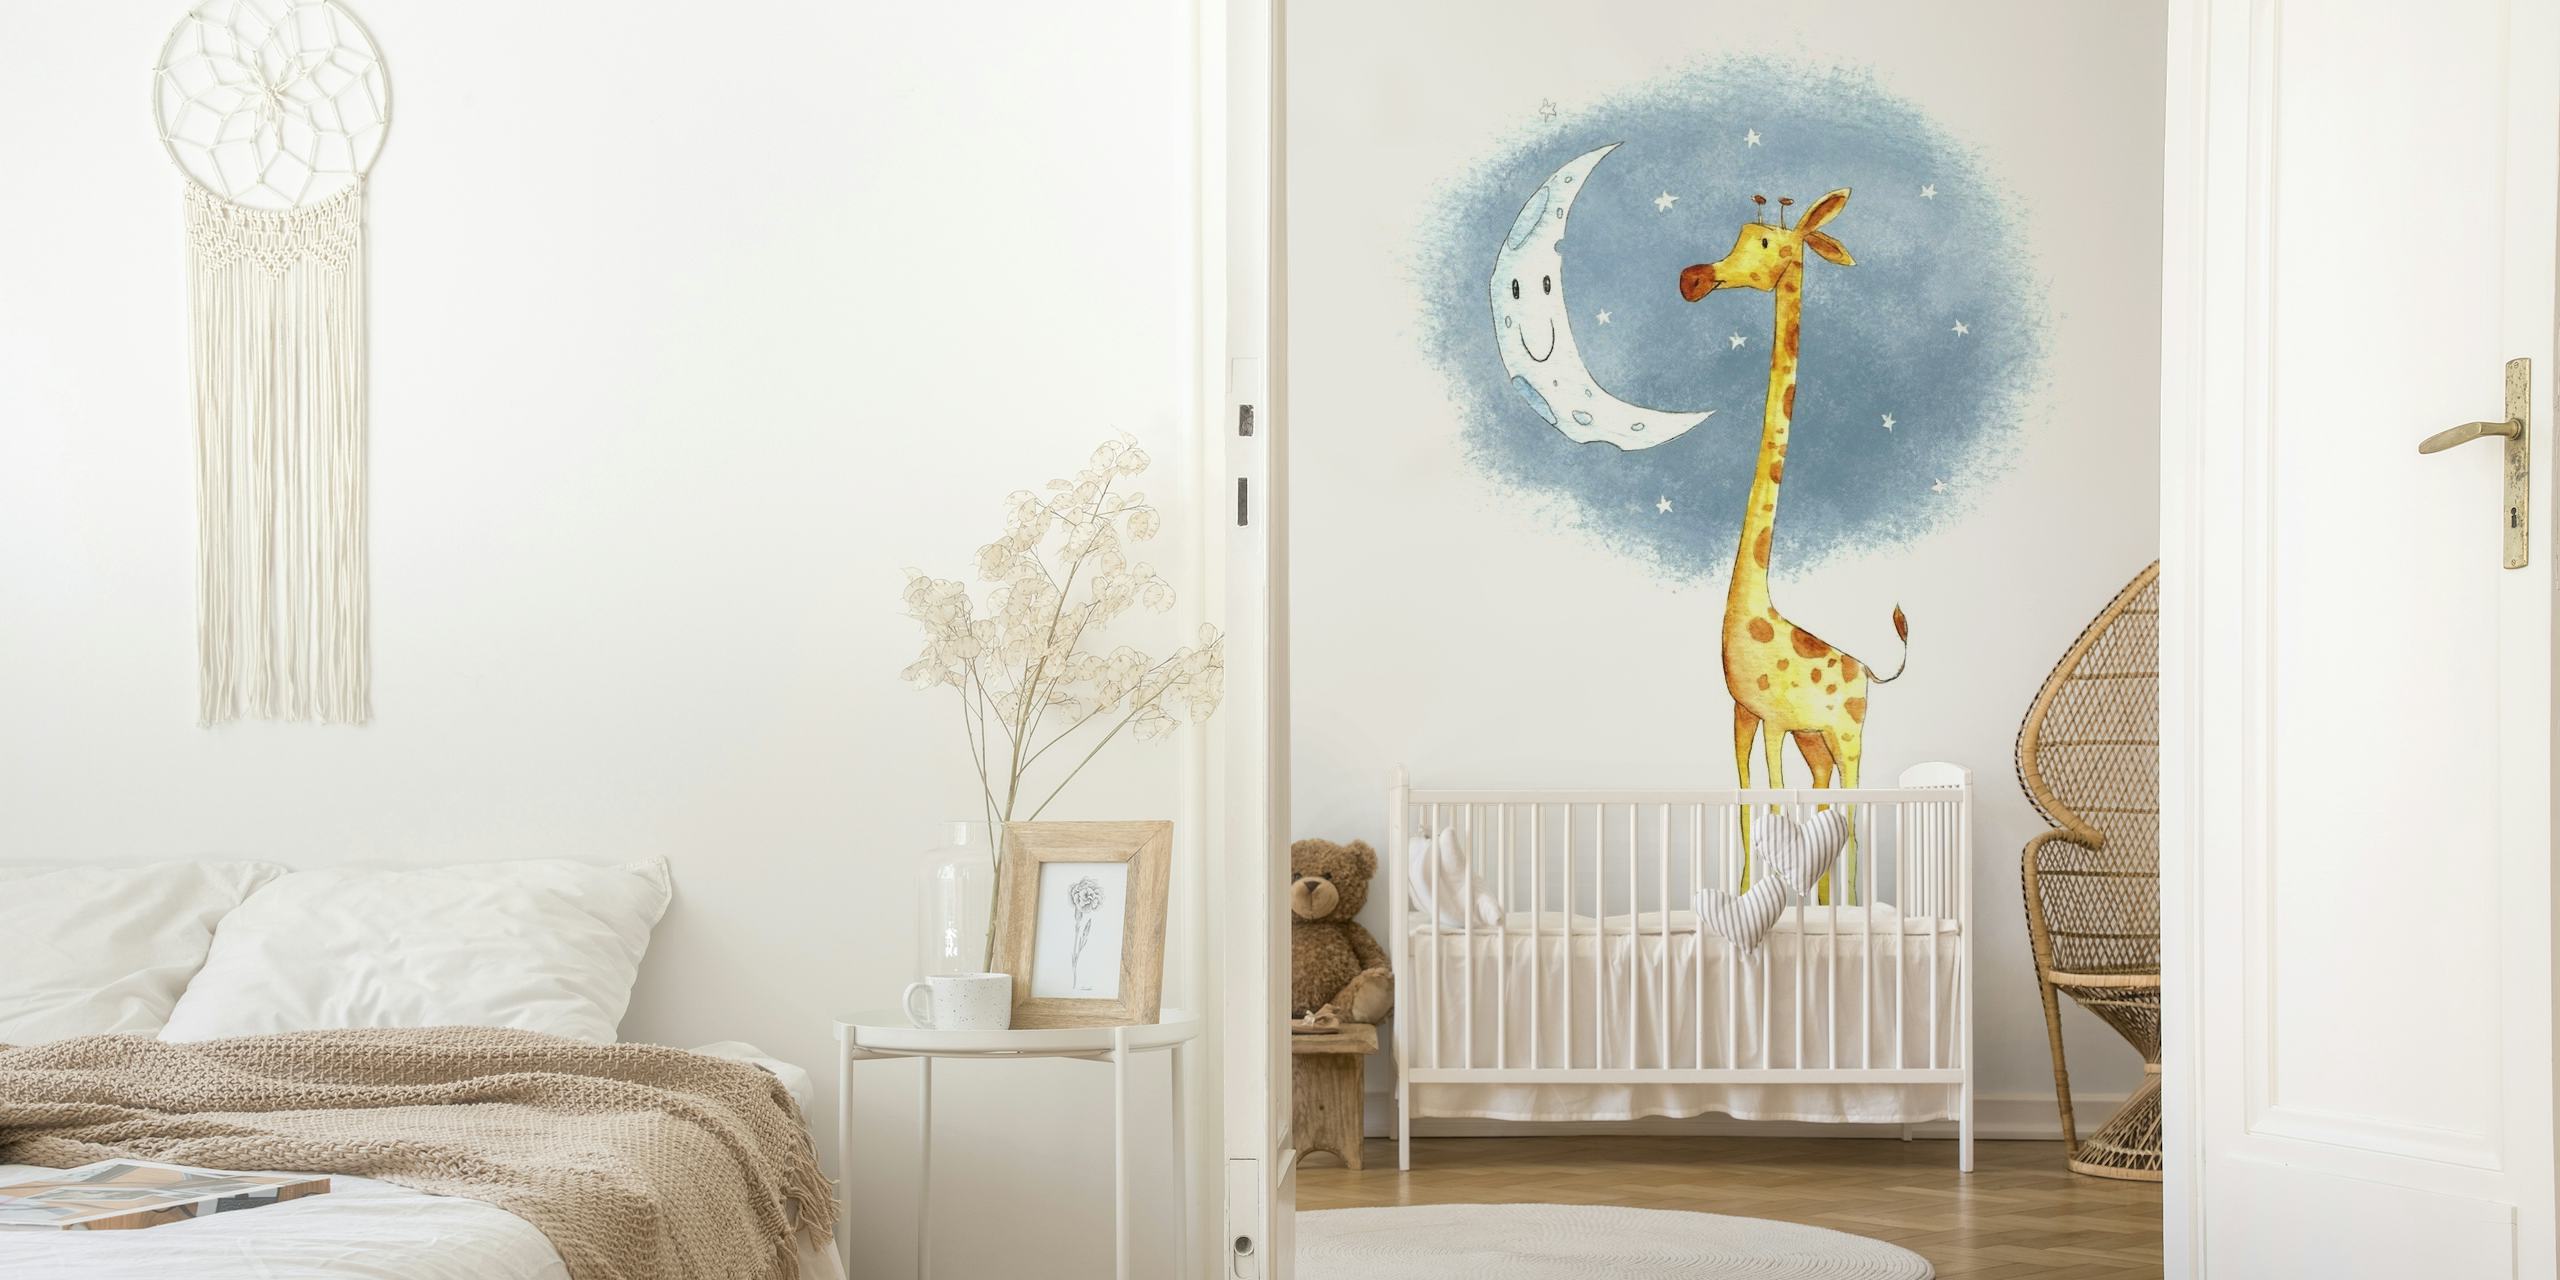 Charming giraffe and smiling moon illustration on a watercolor starry night background for a wall mural